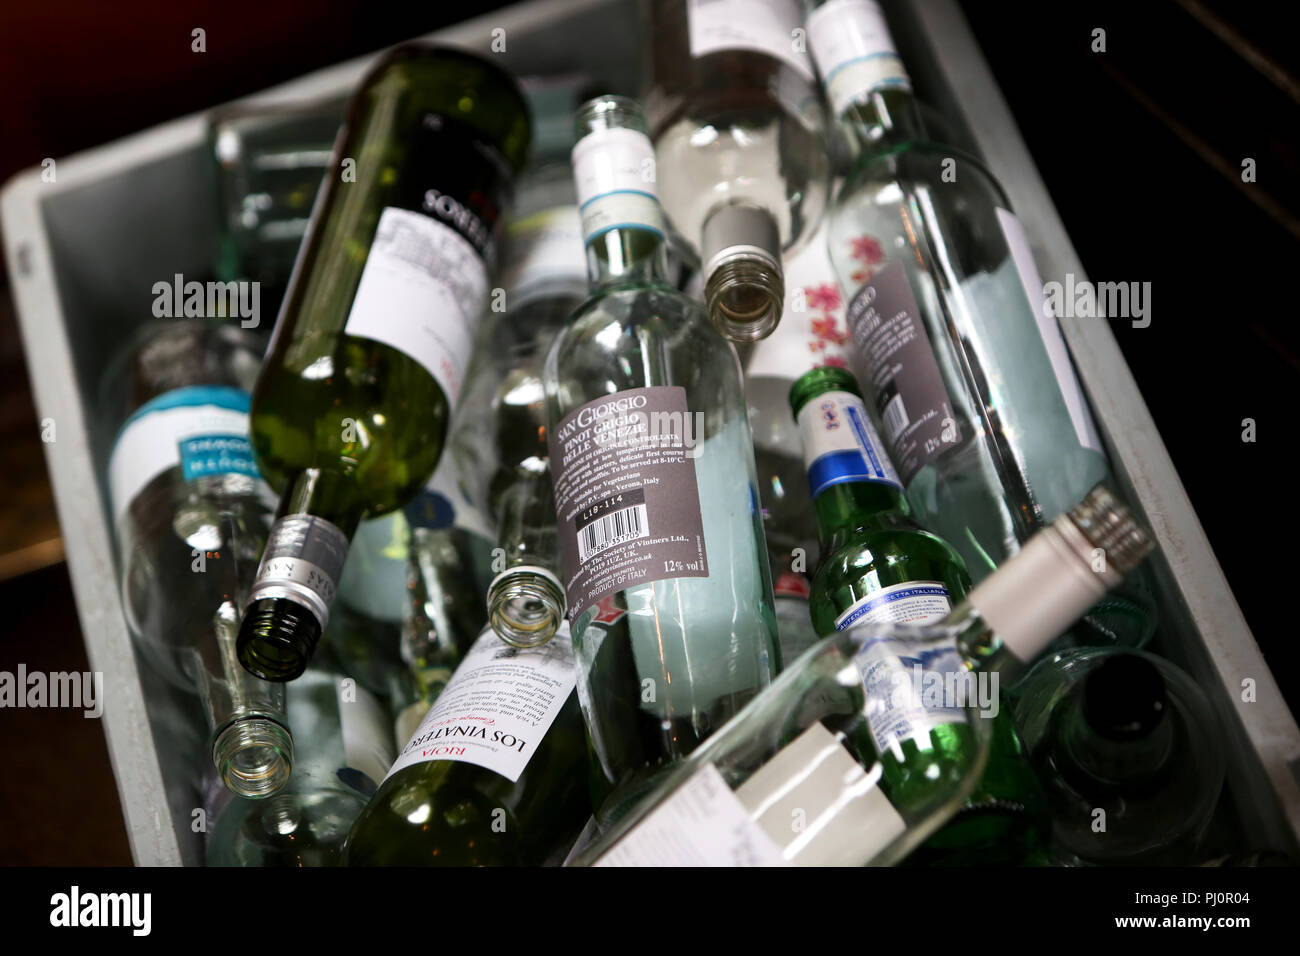 Selection of empty glass wine and beer bottles in a bin in London, UK. Stock Photo